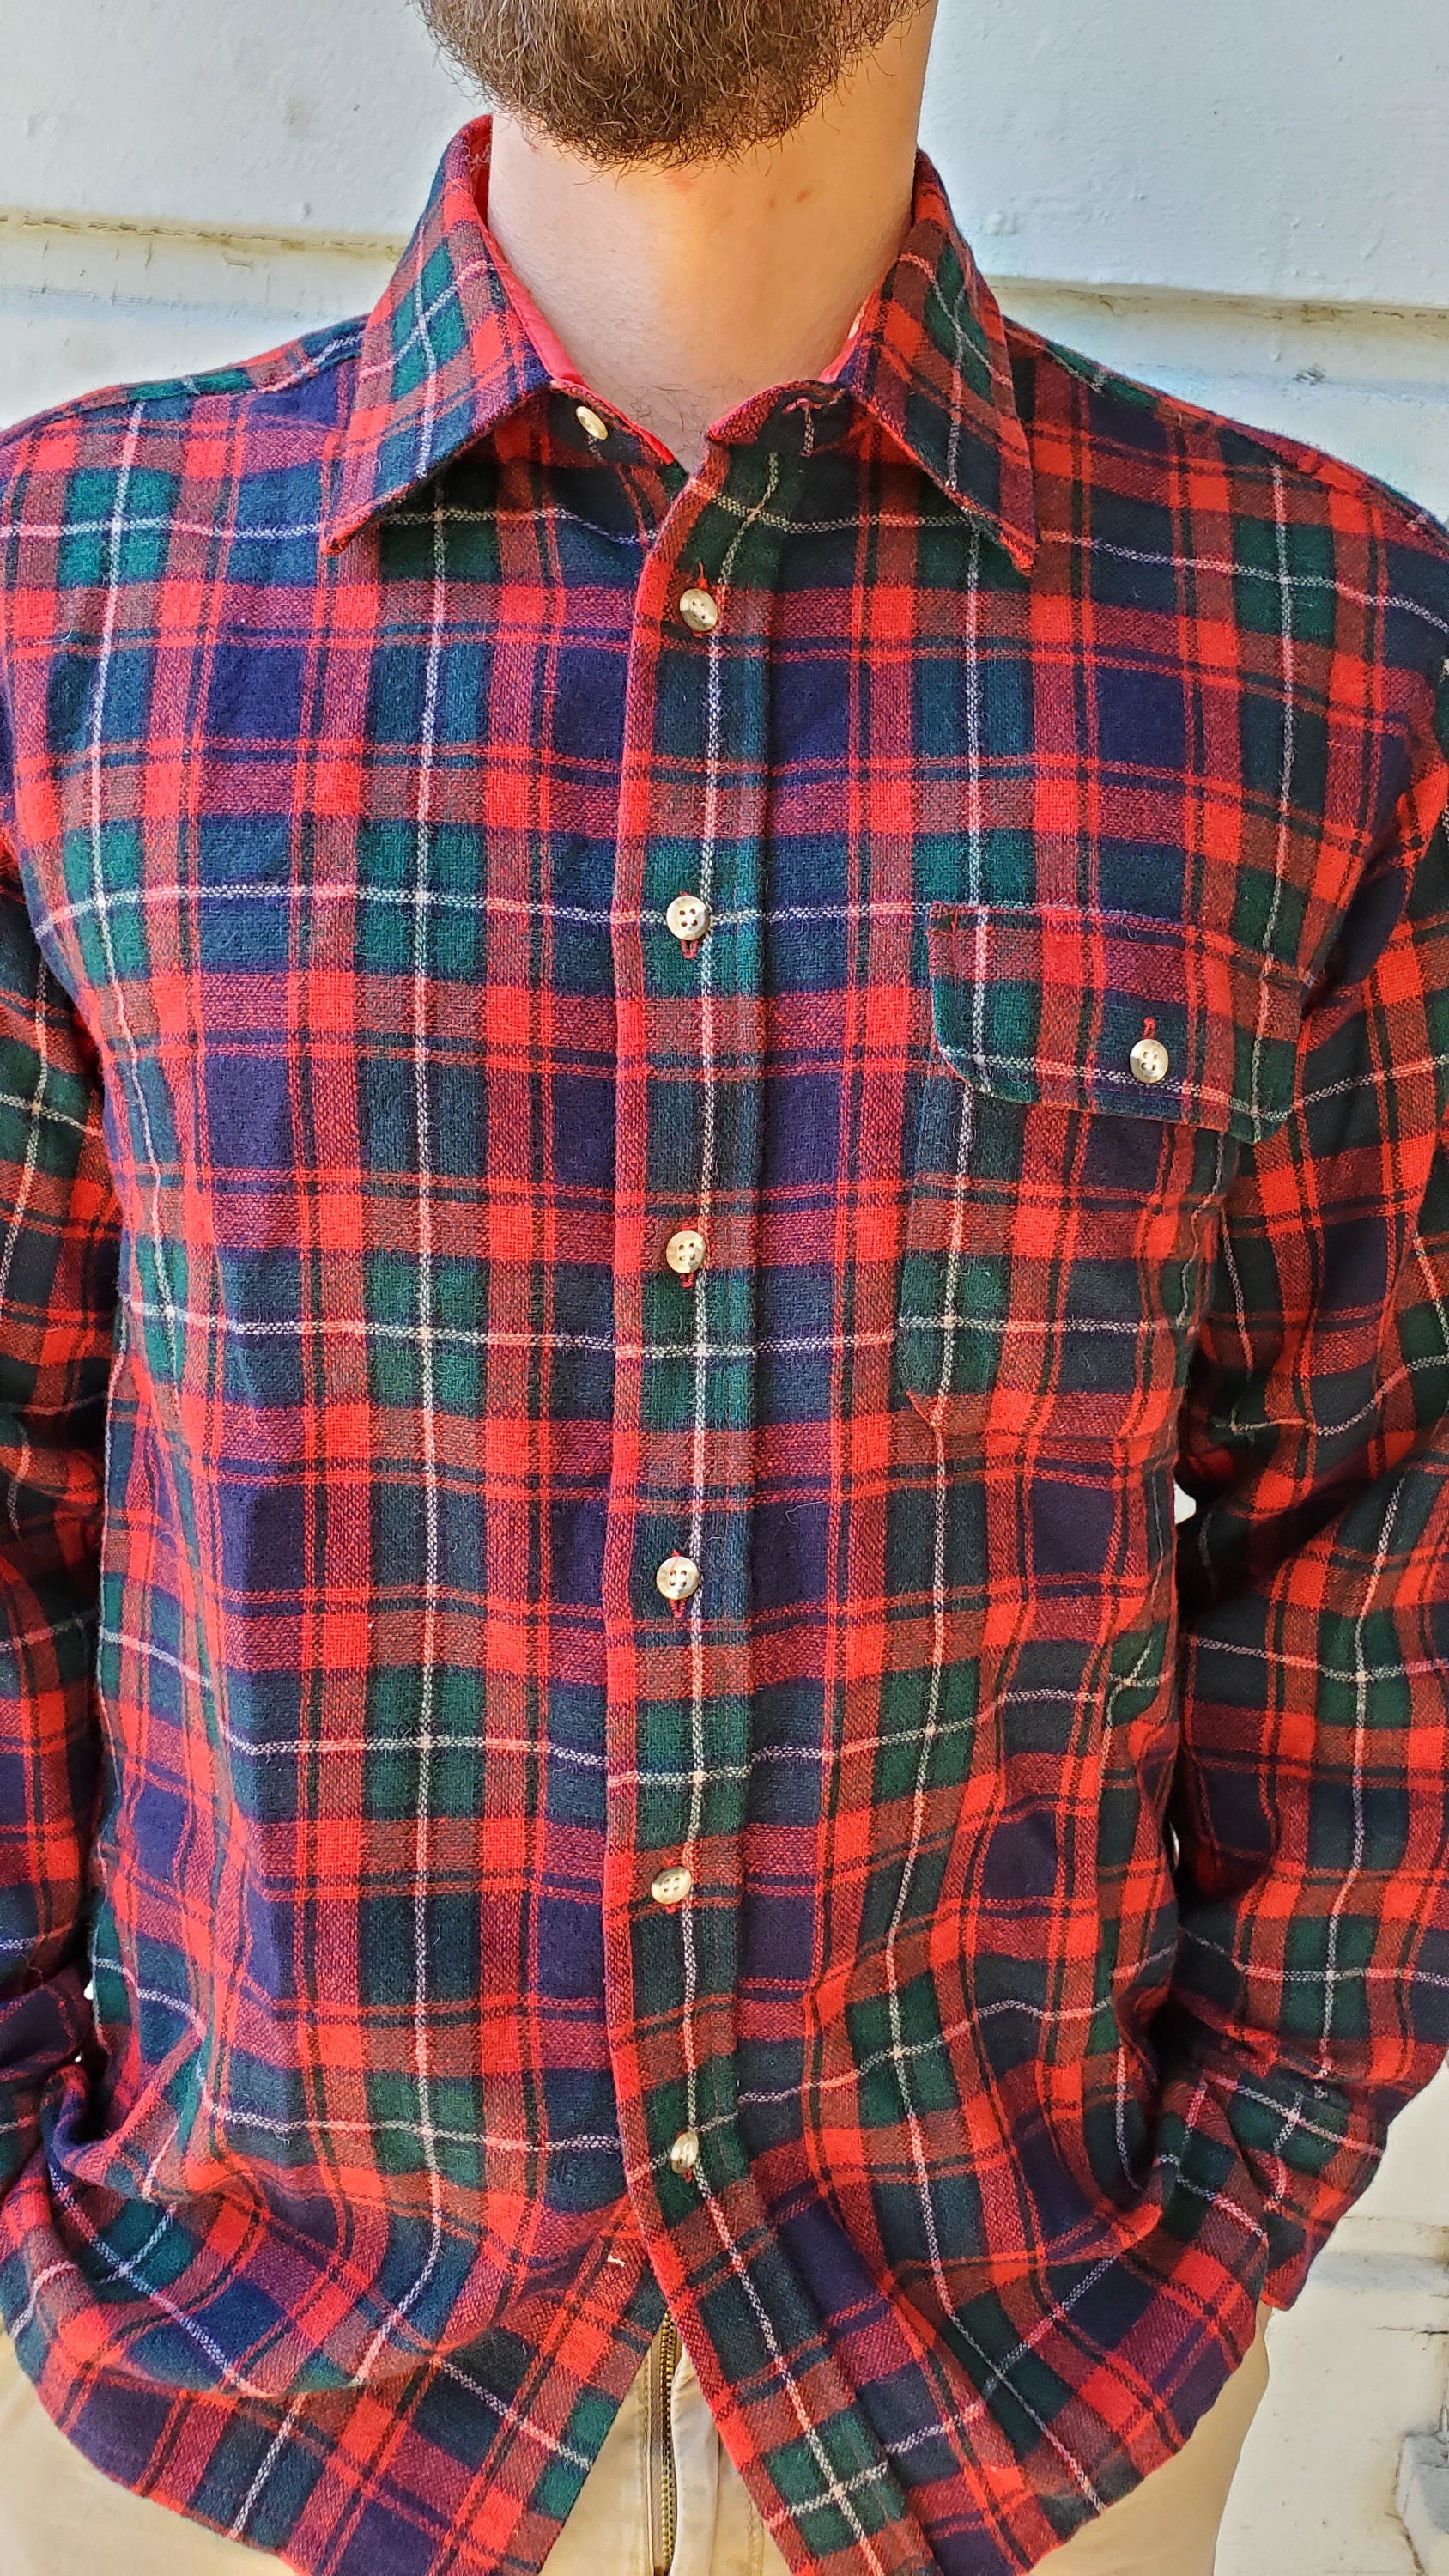 Vintage 1970s Red and Green Plaid Men's Wool Flannel by JG | Etsy